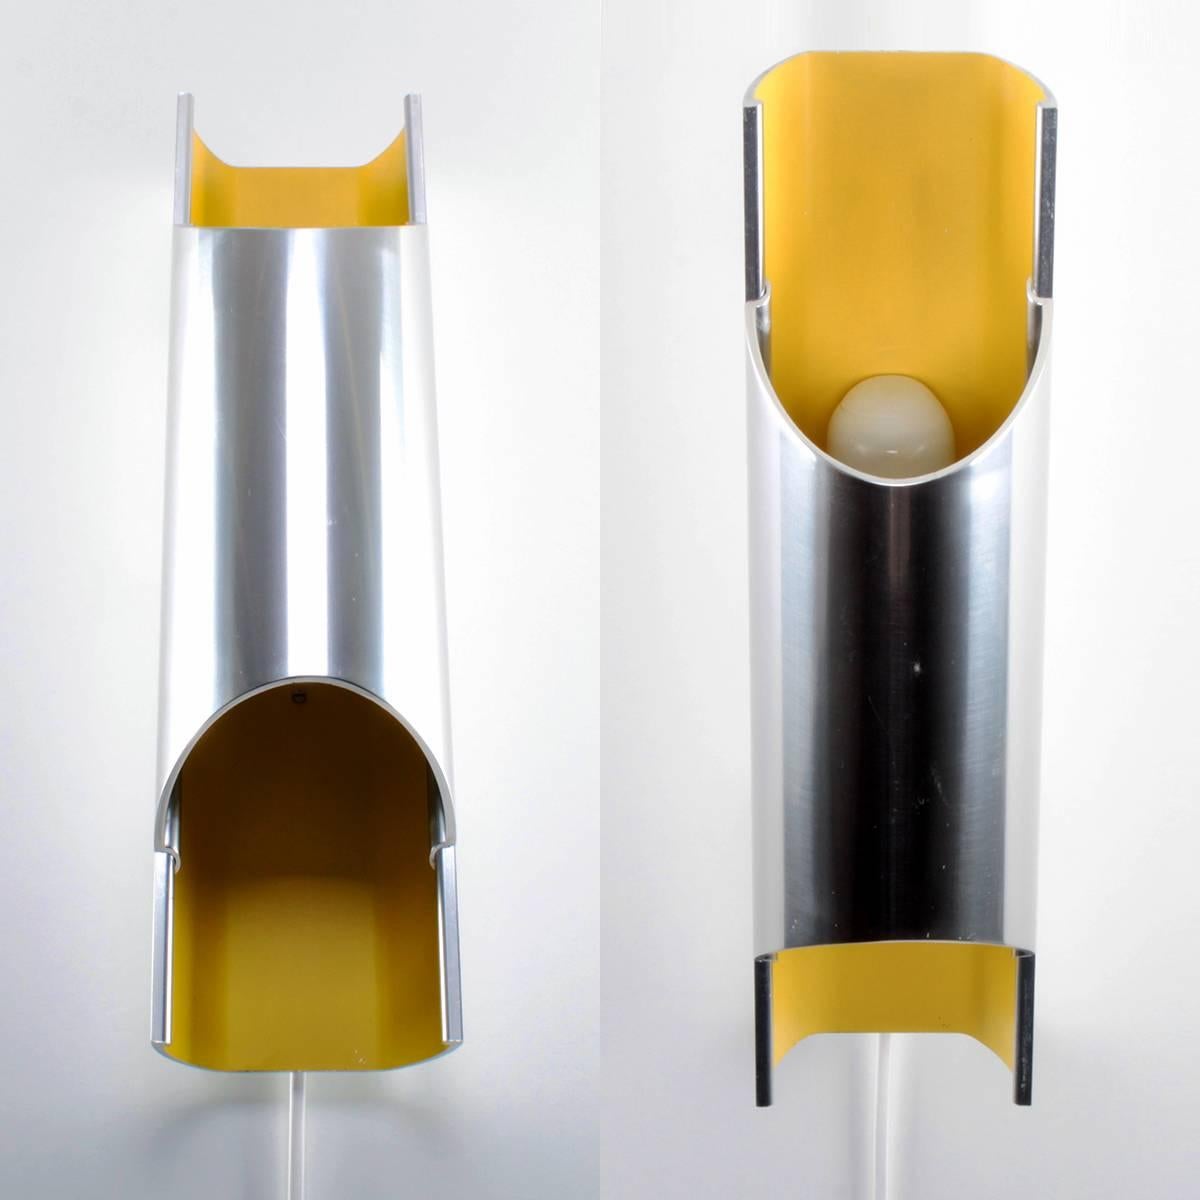 Mid-Century Modern Pandean Sconce by Bent Karlby, Lyfa, Beautiful Yellow and Aluminium Wall Lamp For Sale